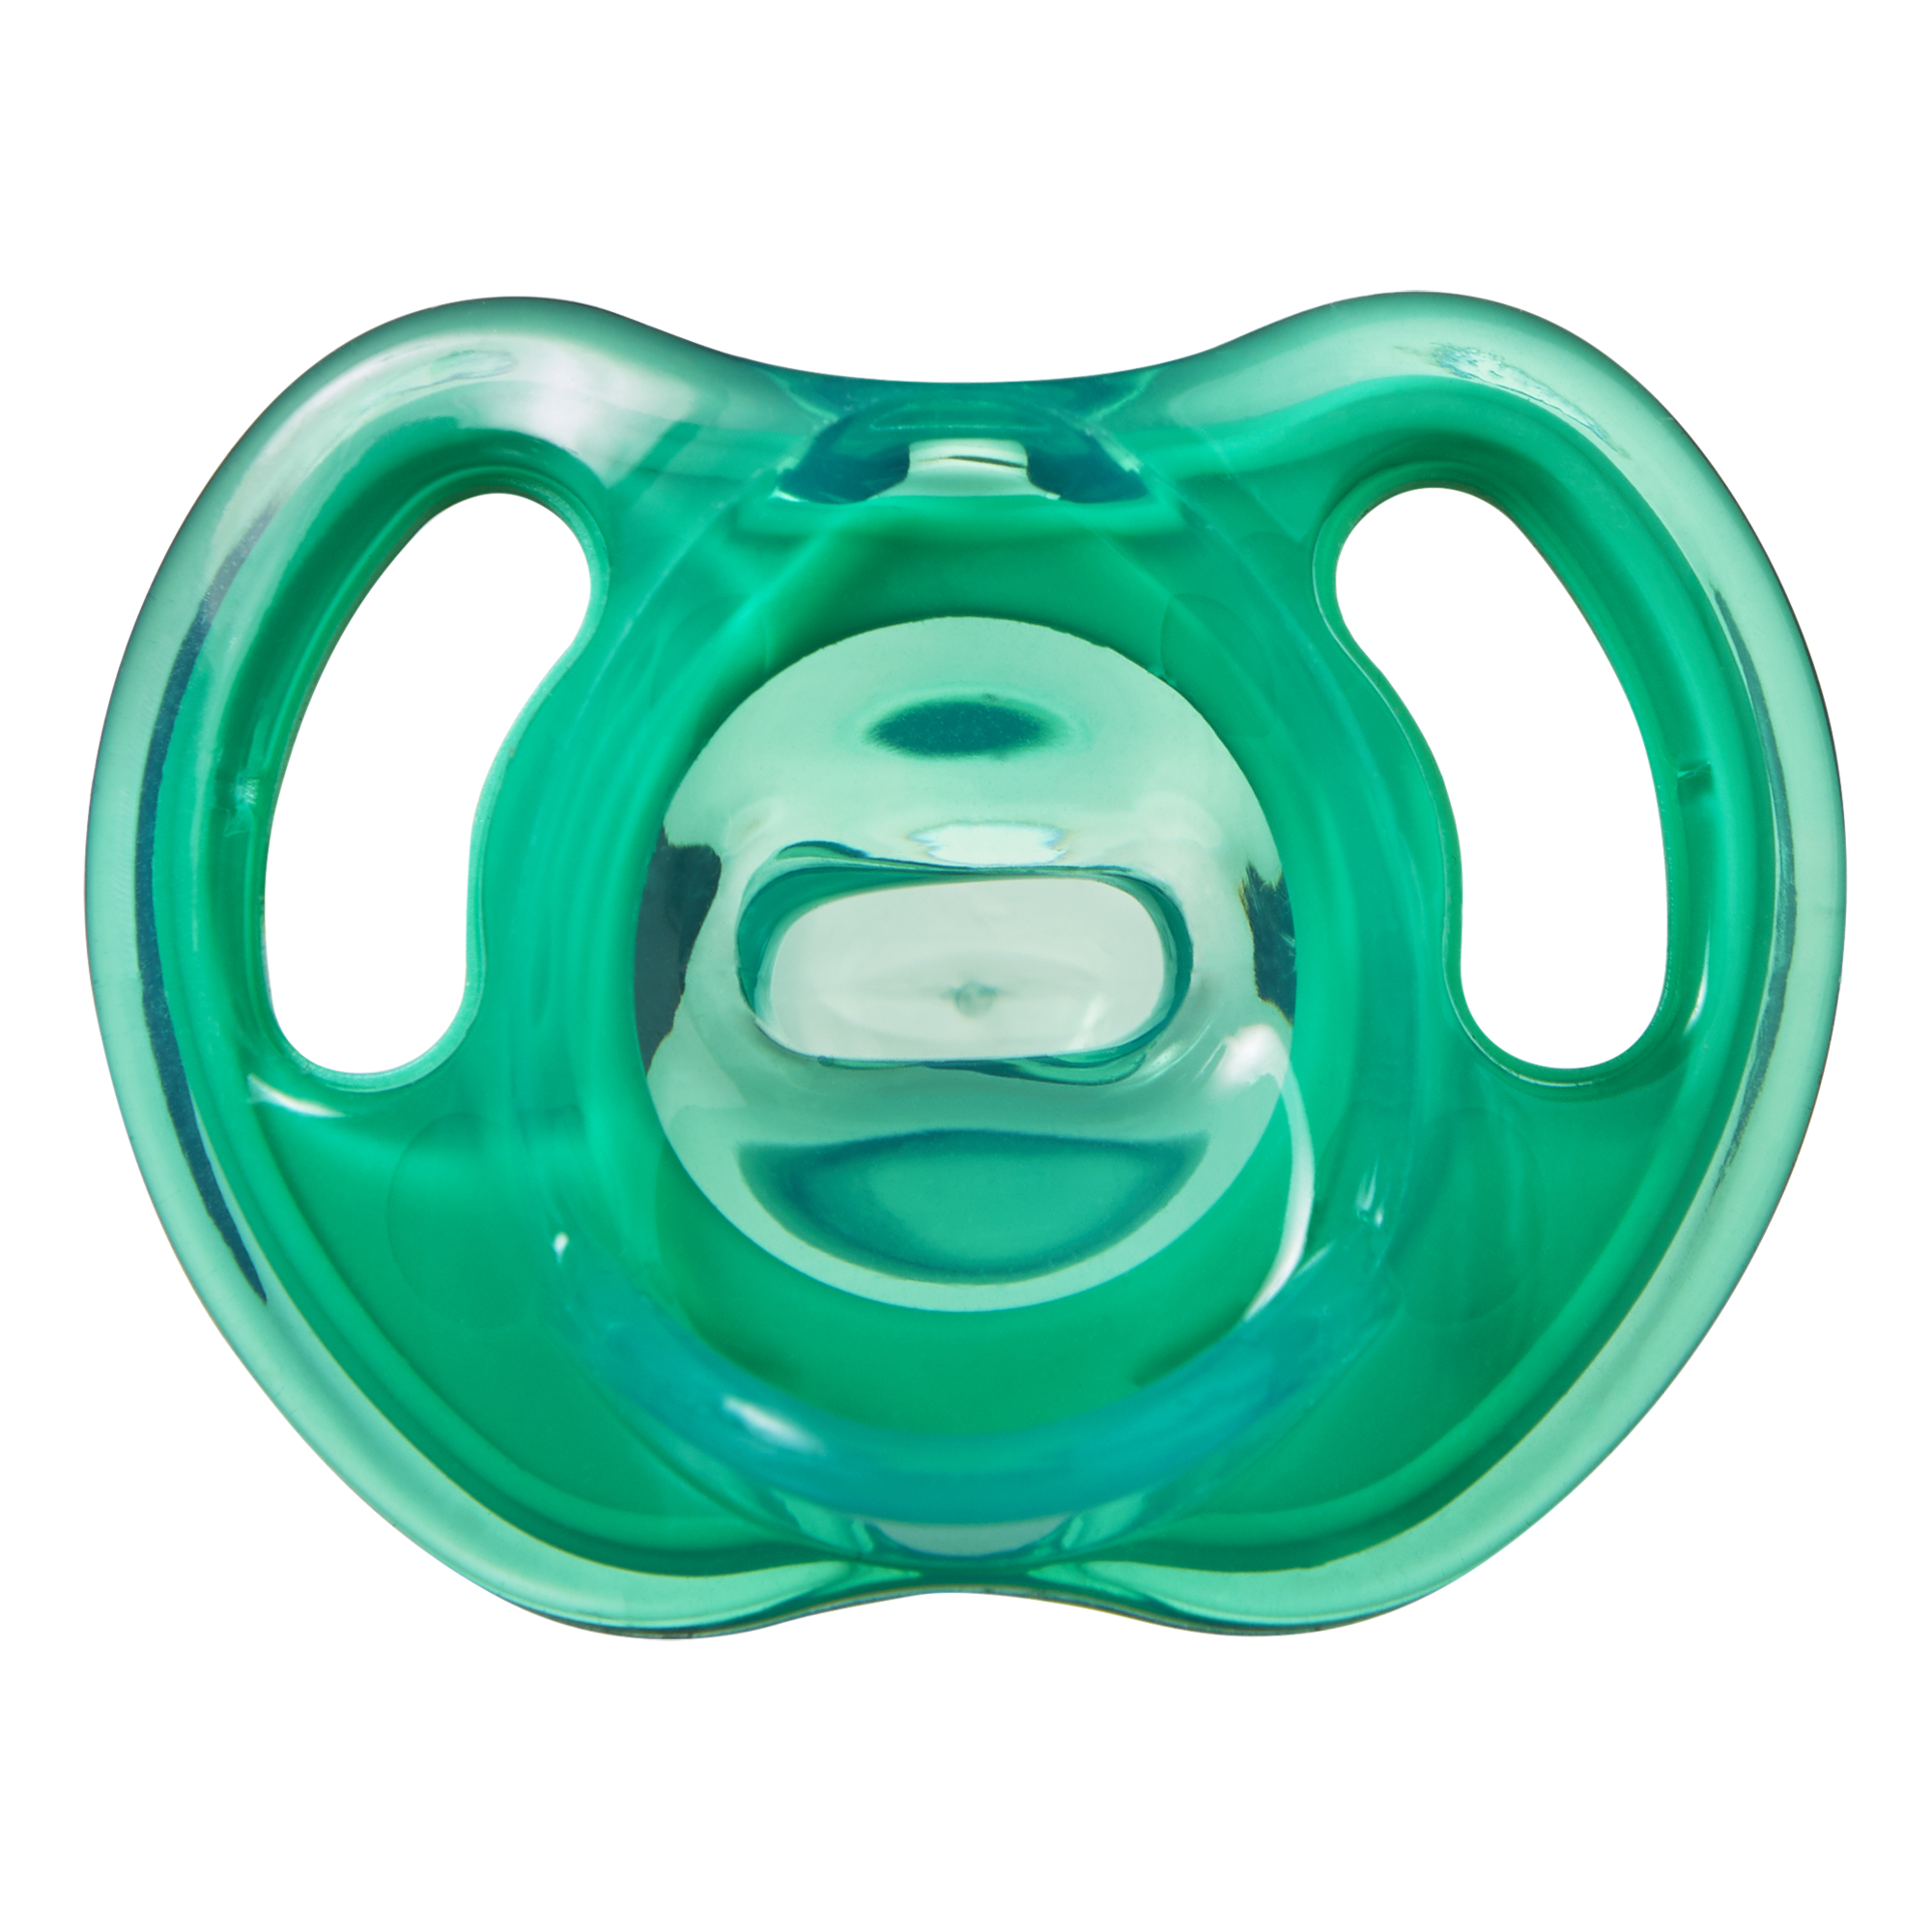 Tommee Tippee Ultra-Light Silicone Pacifier, Symmetrical One-Piece Design, BPA-Free Silicone Binkies, 18-36m, 4-Count - image 4 of 8